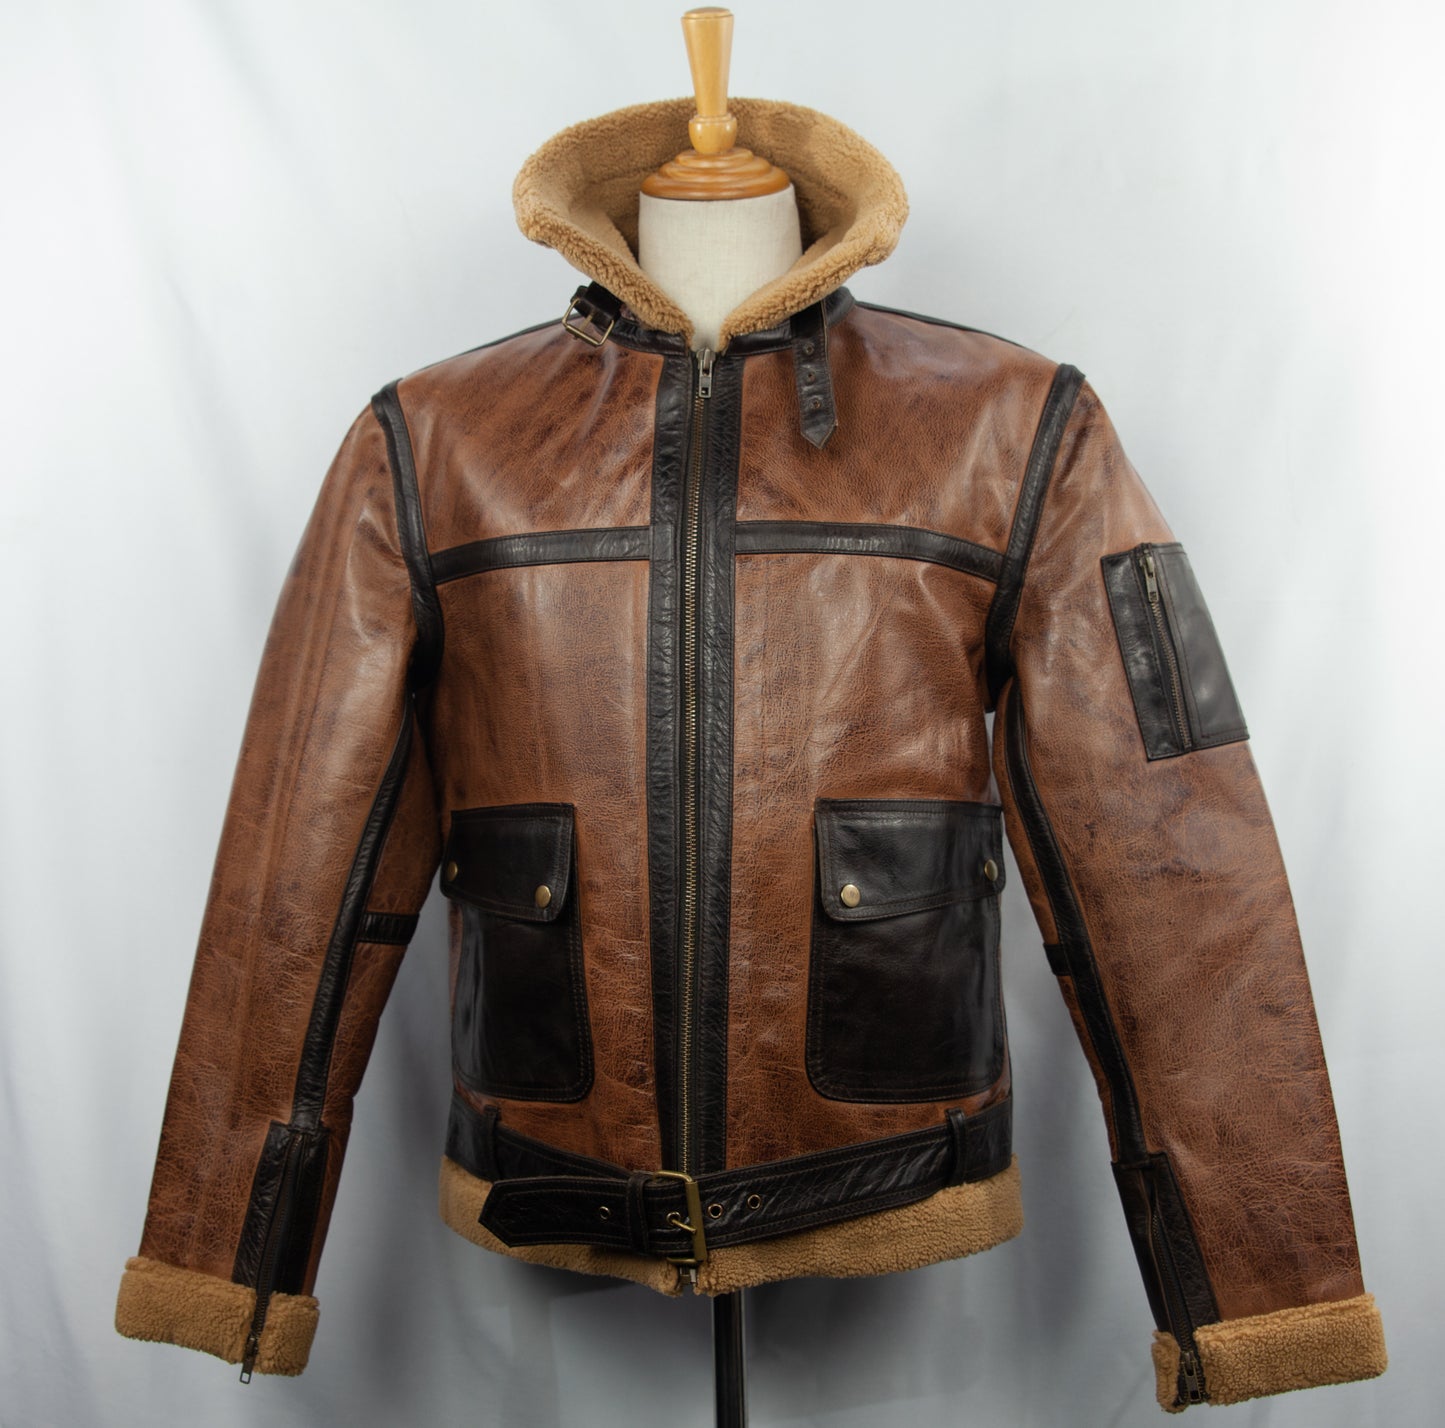 Aviator Brown Leather Jacket with Fur Collar